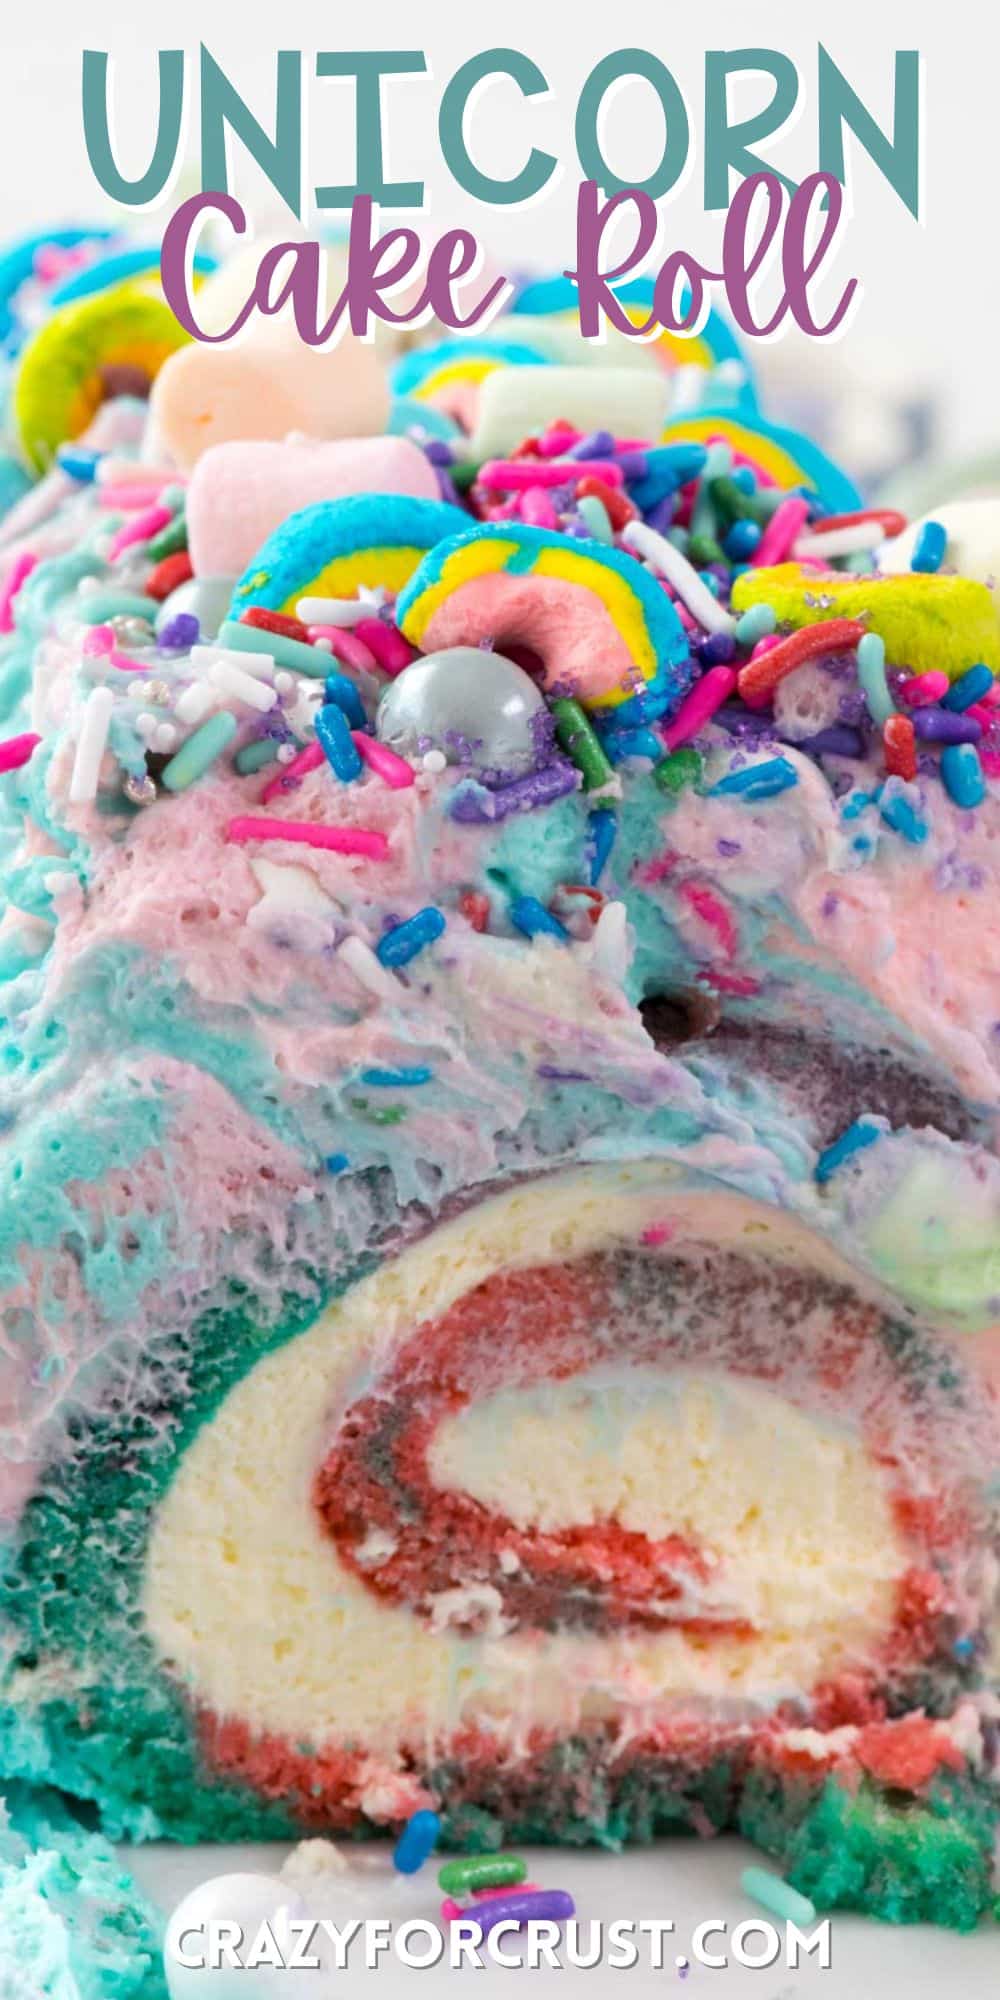 colorful cake roll covered in tie-dye frosting and colorful cereal with words on the image.